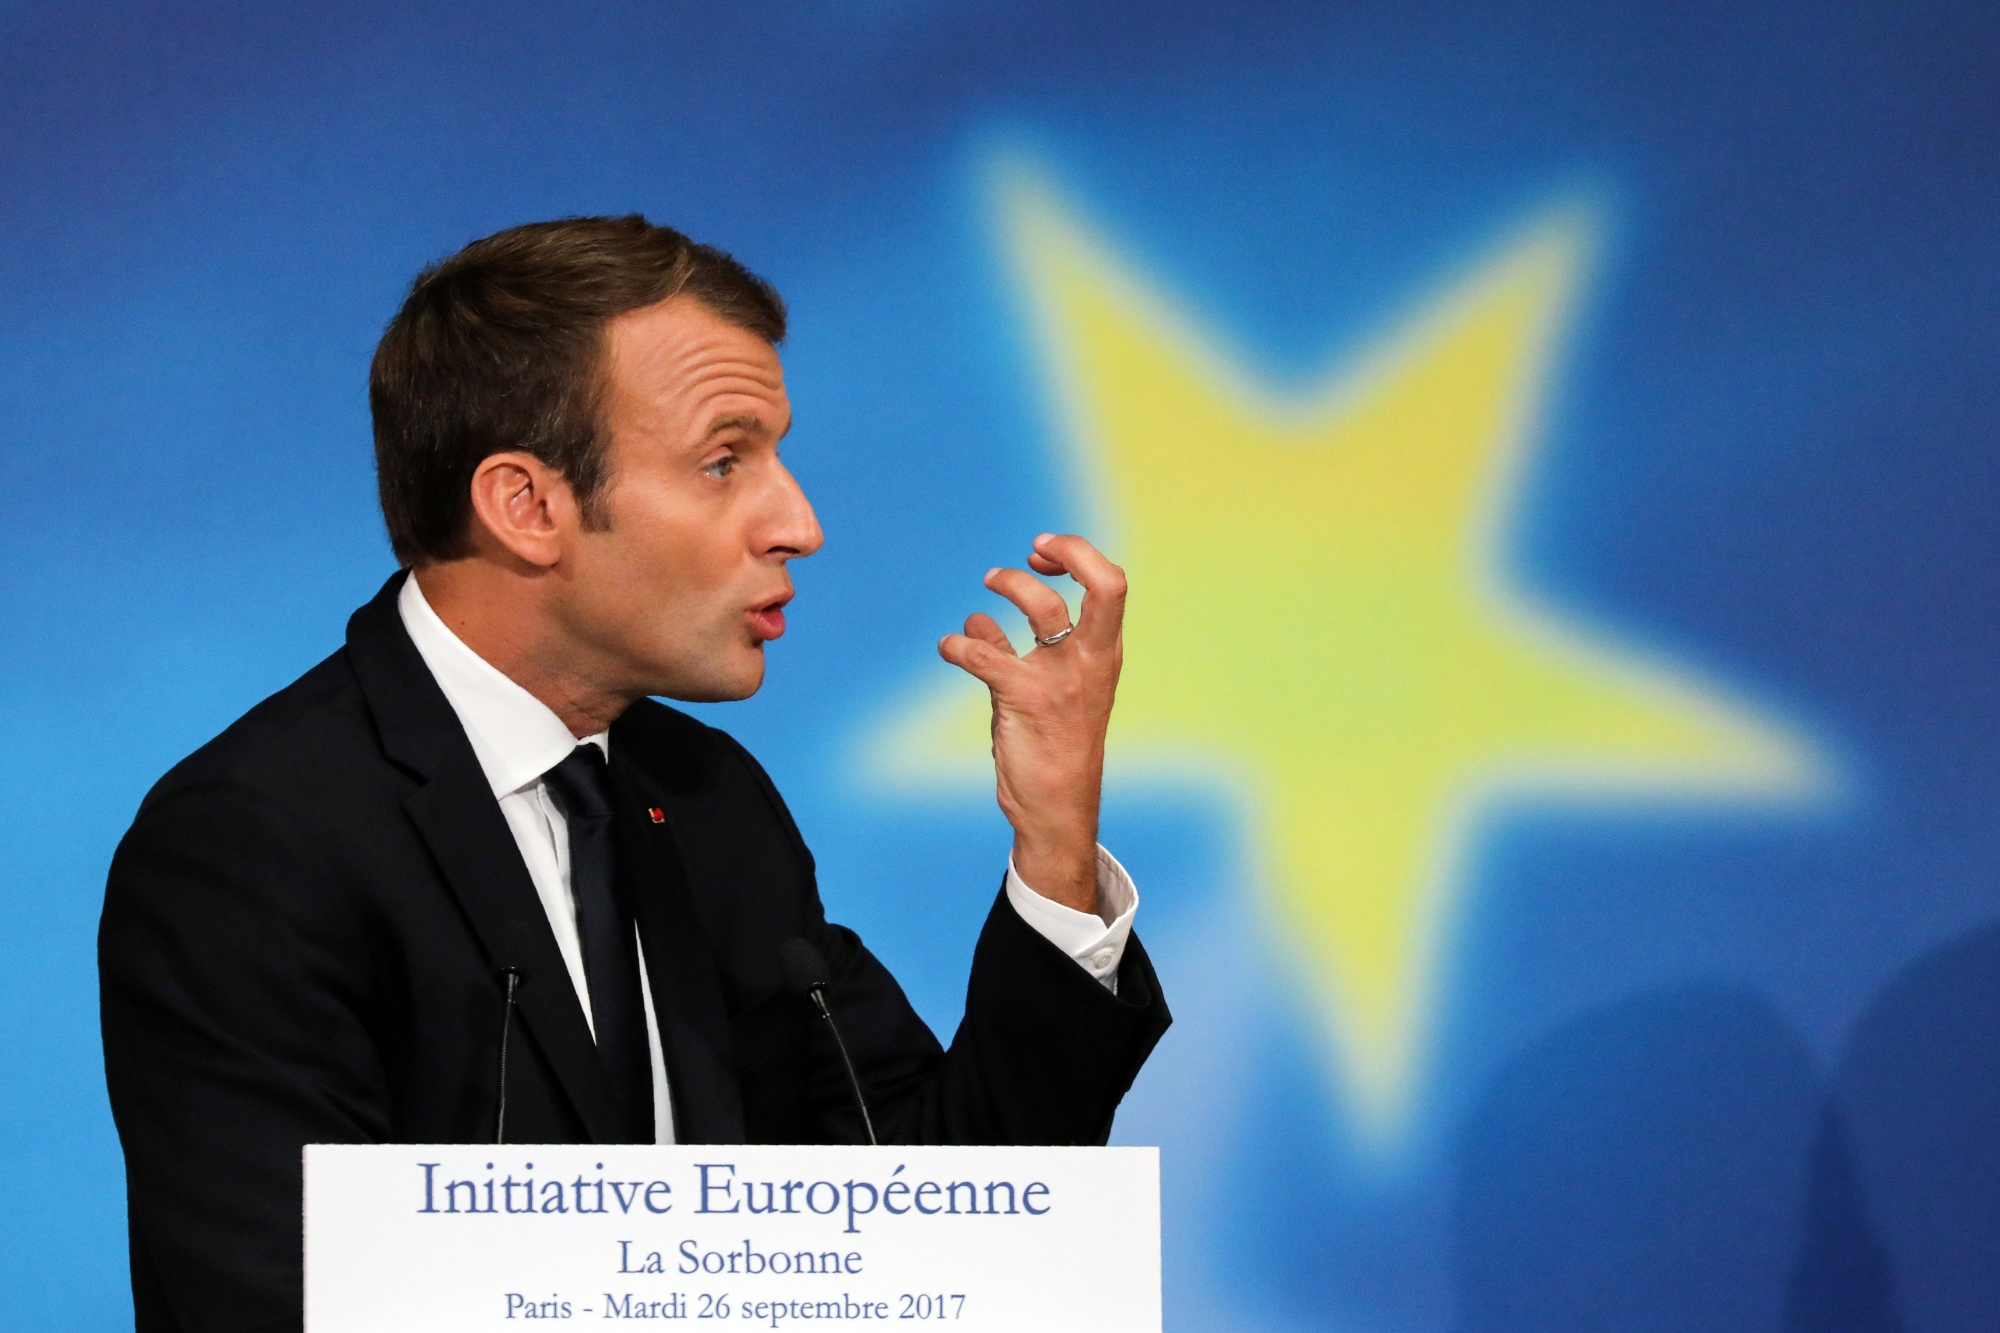 epa06228201 French President Emmanuel Macron delivers a speech on the European Union at the amphitheater of the Sorbonne University in Paris, France, 26 September 2017. French President Emmanuel Macron will set out his vision for a rebooted European Union.  EPA/LUDOVIC MARIN / POOL MAXPPP OUT FRANCE POLITICS EU DIPLOMACY